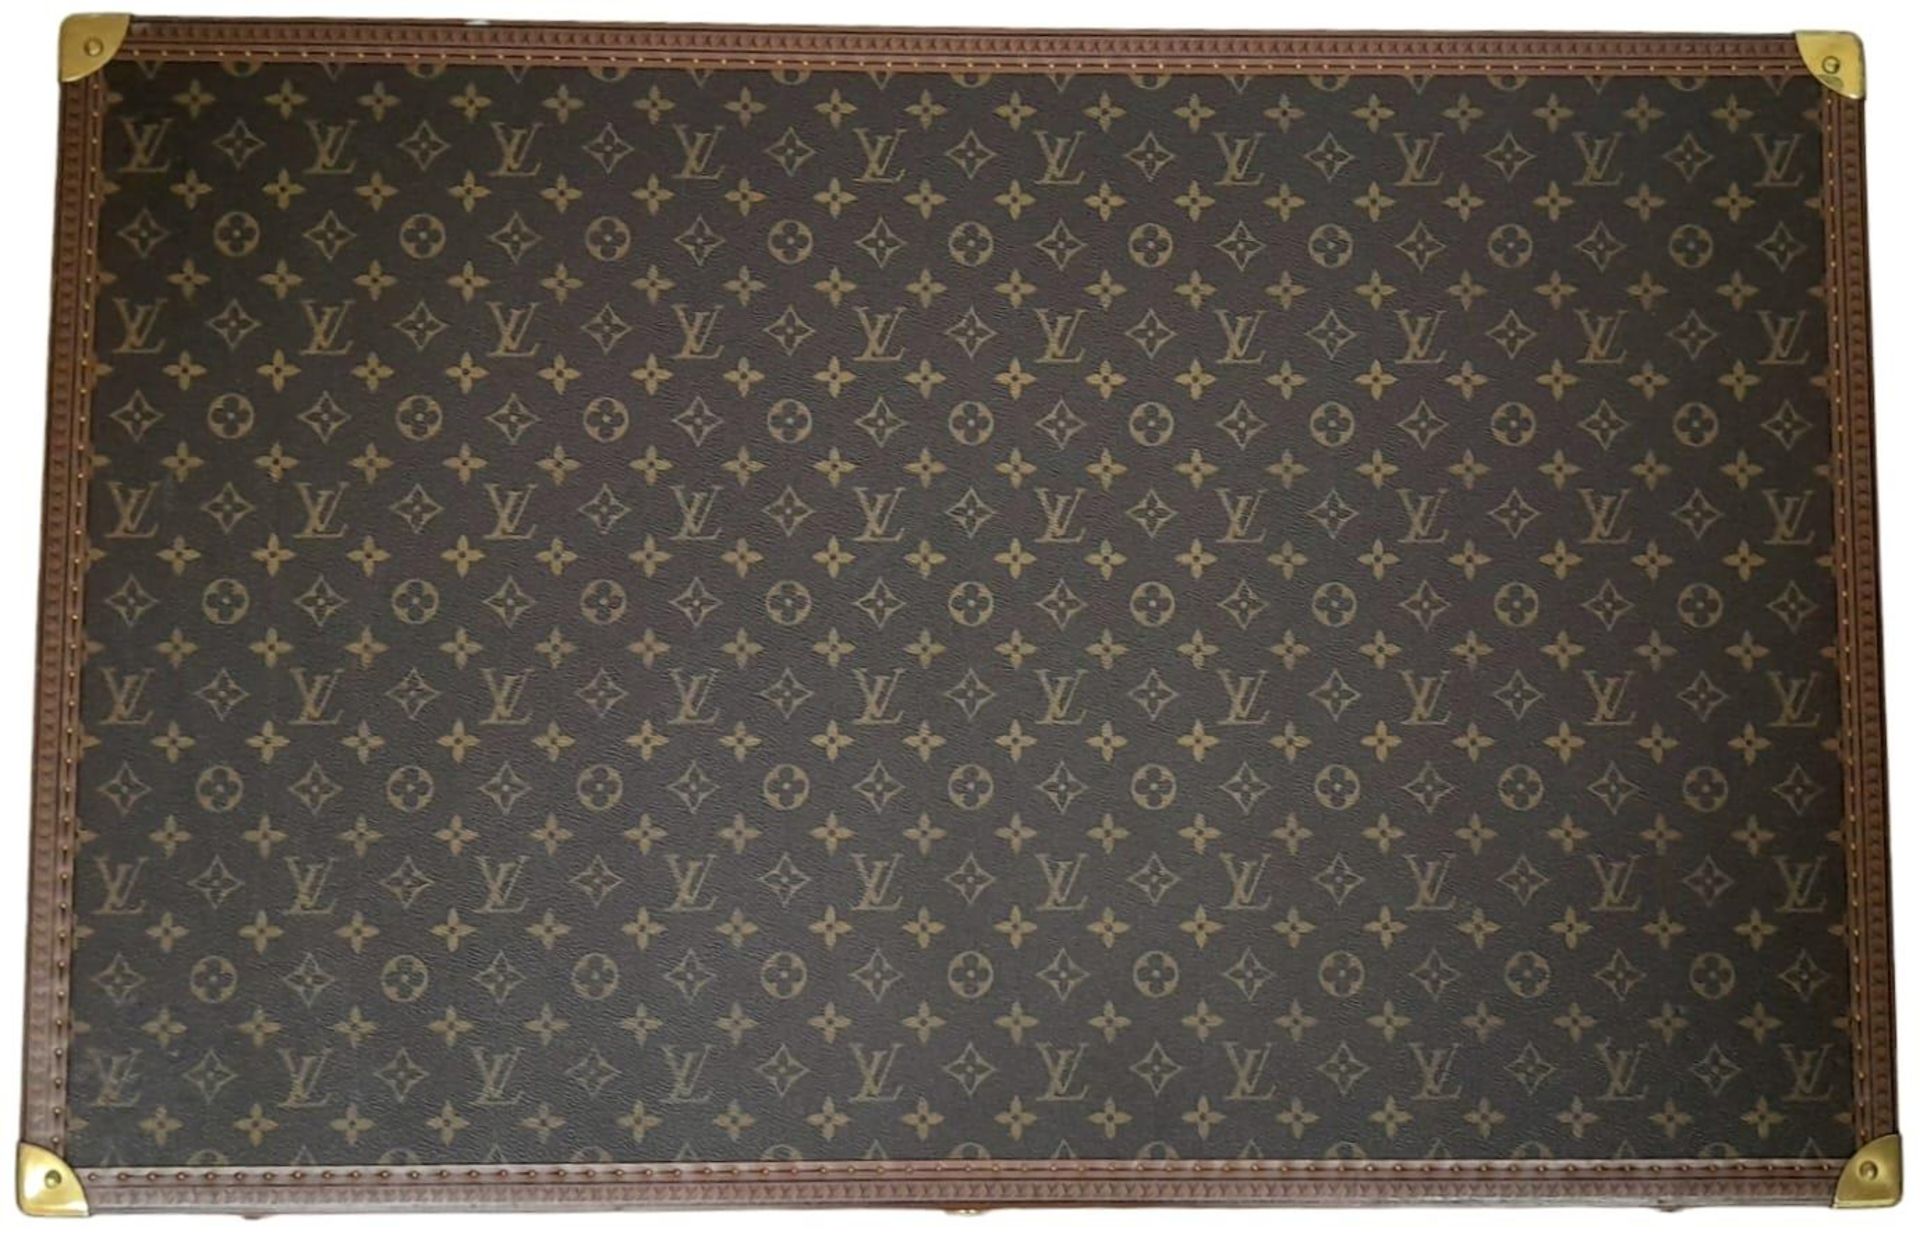 A Louis Vuitton Alzer 80 Monogram Large Sturdy Suitcase/Trunk. Monogram canvas and brown leather - Image 2 of 11